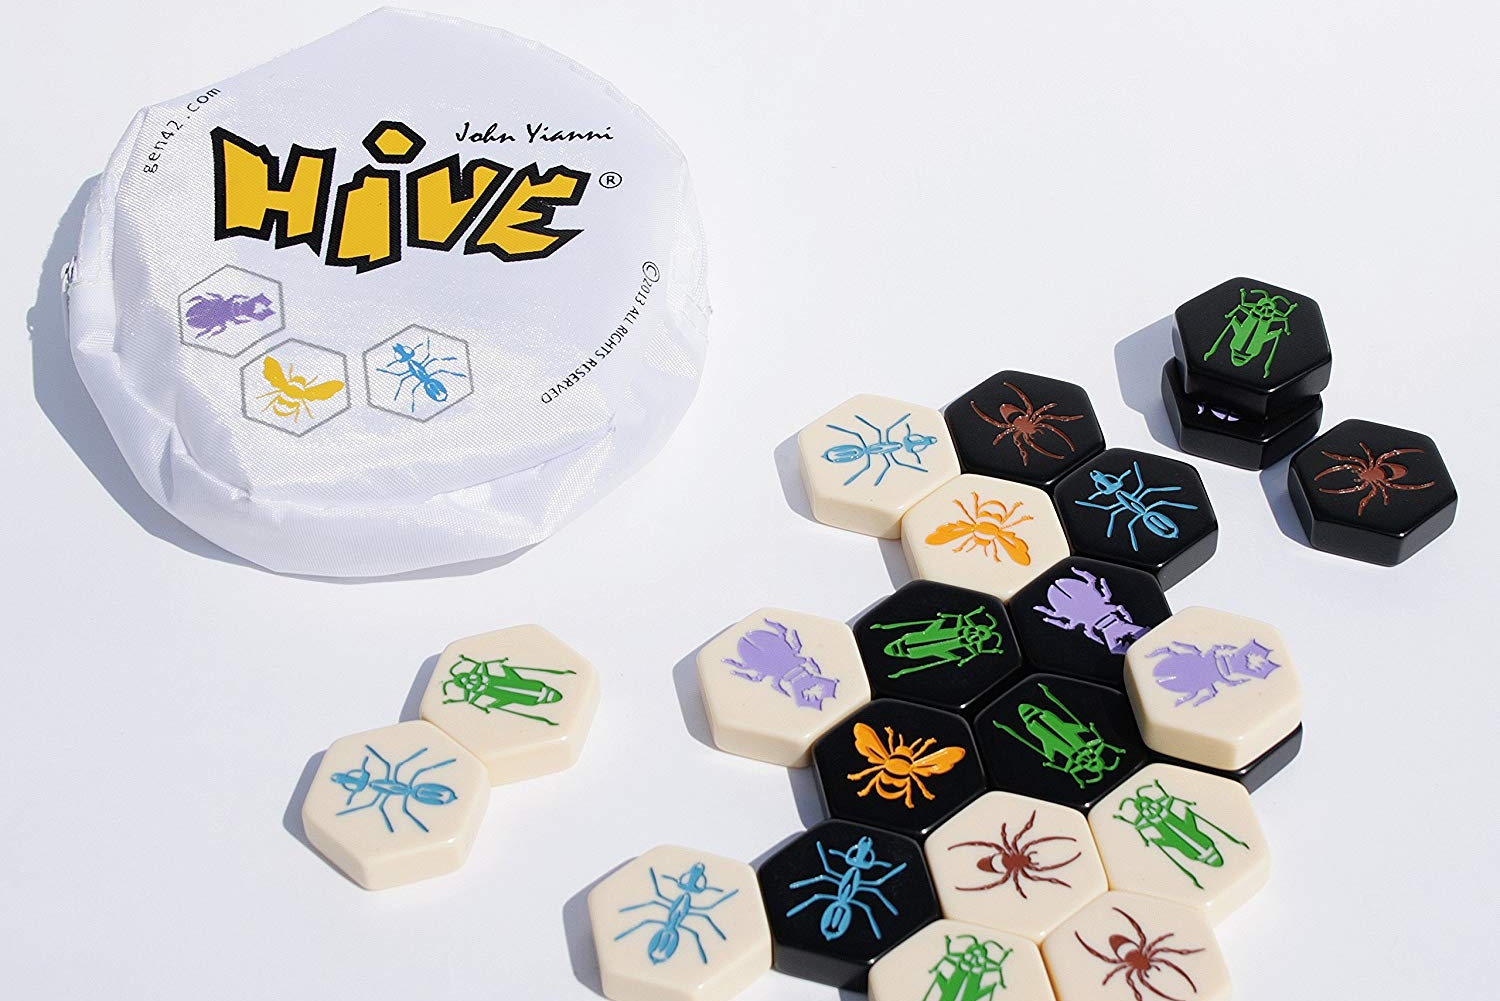 Games for couples hive board game